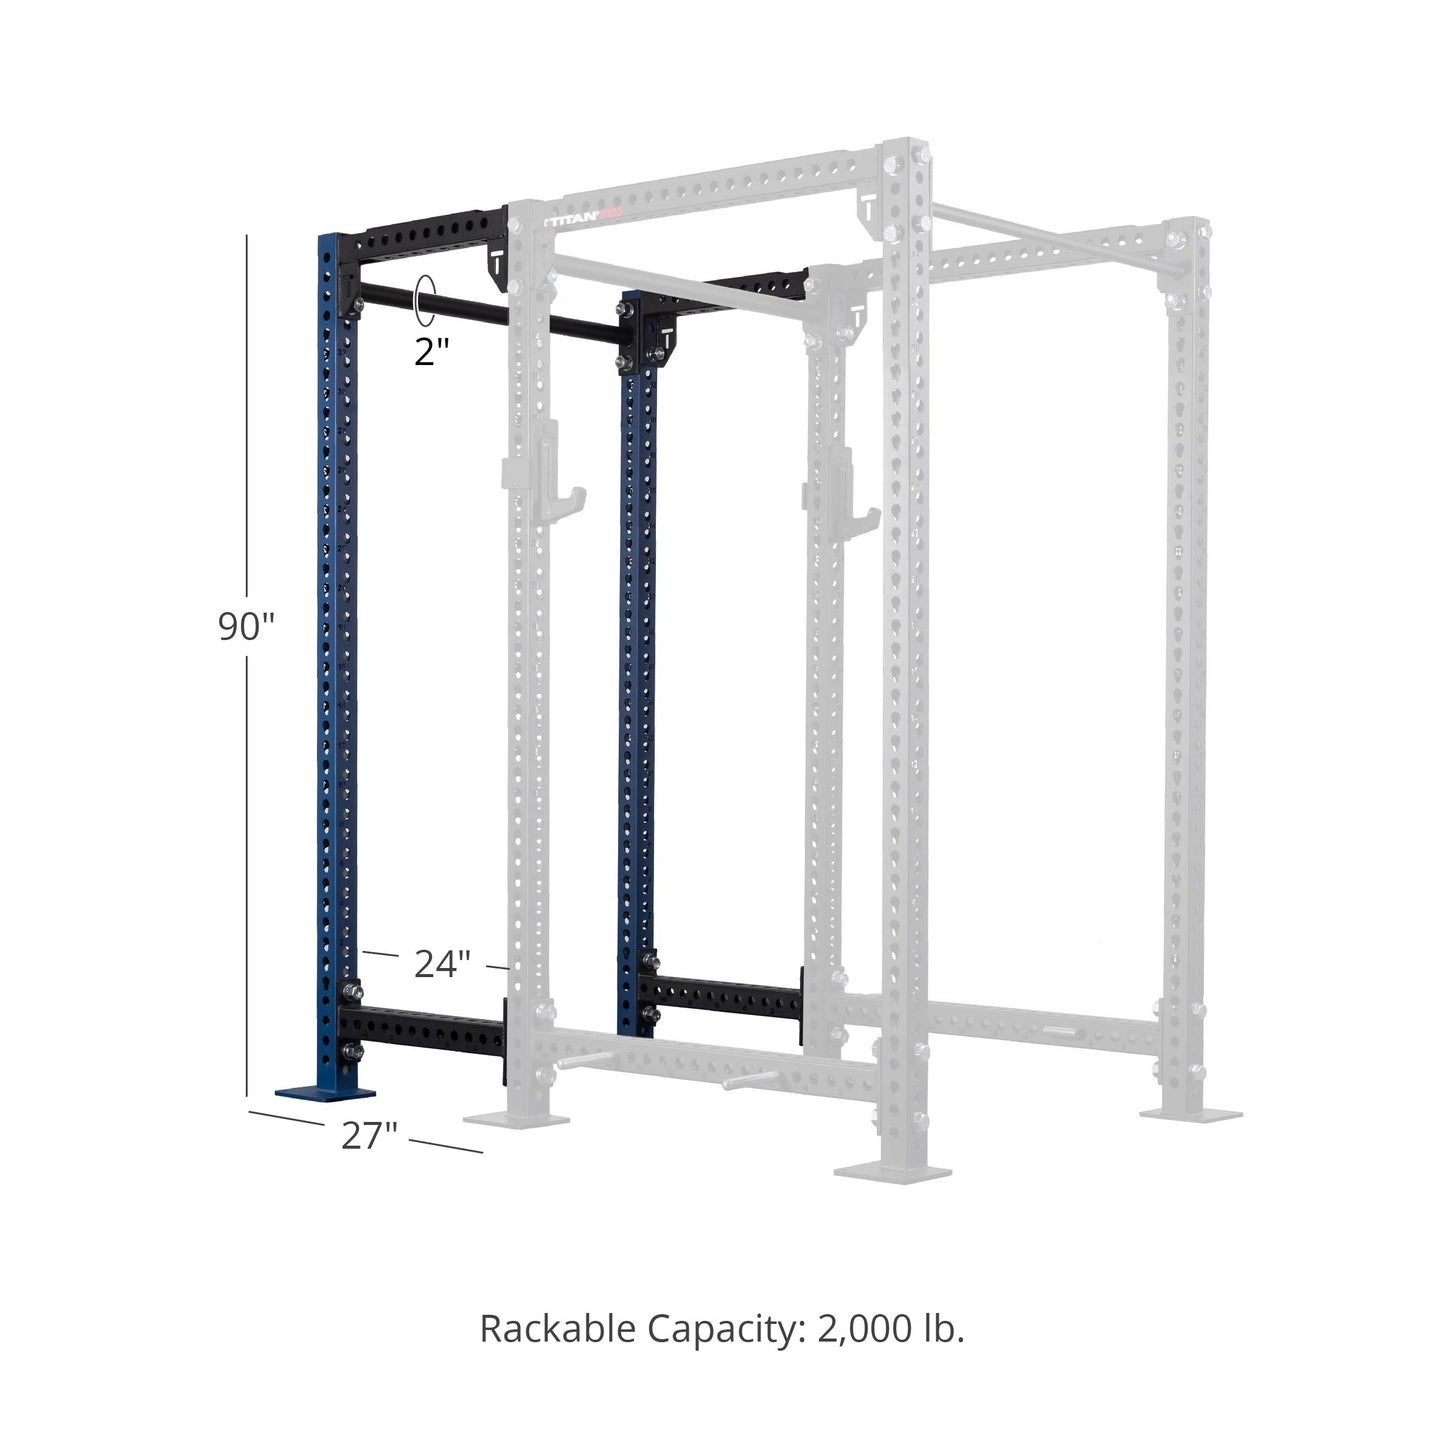 TITAN Series 24" Extension Kit - Extension Color: Navy - Extension Height: 90" - Crossmember: 2" Fat Pull-Up Bar | Navy / 90" / 2" Fat Pull-Up Bar - view 54